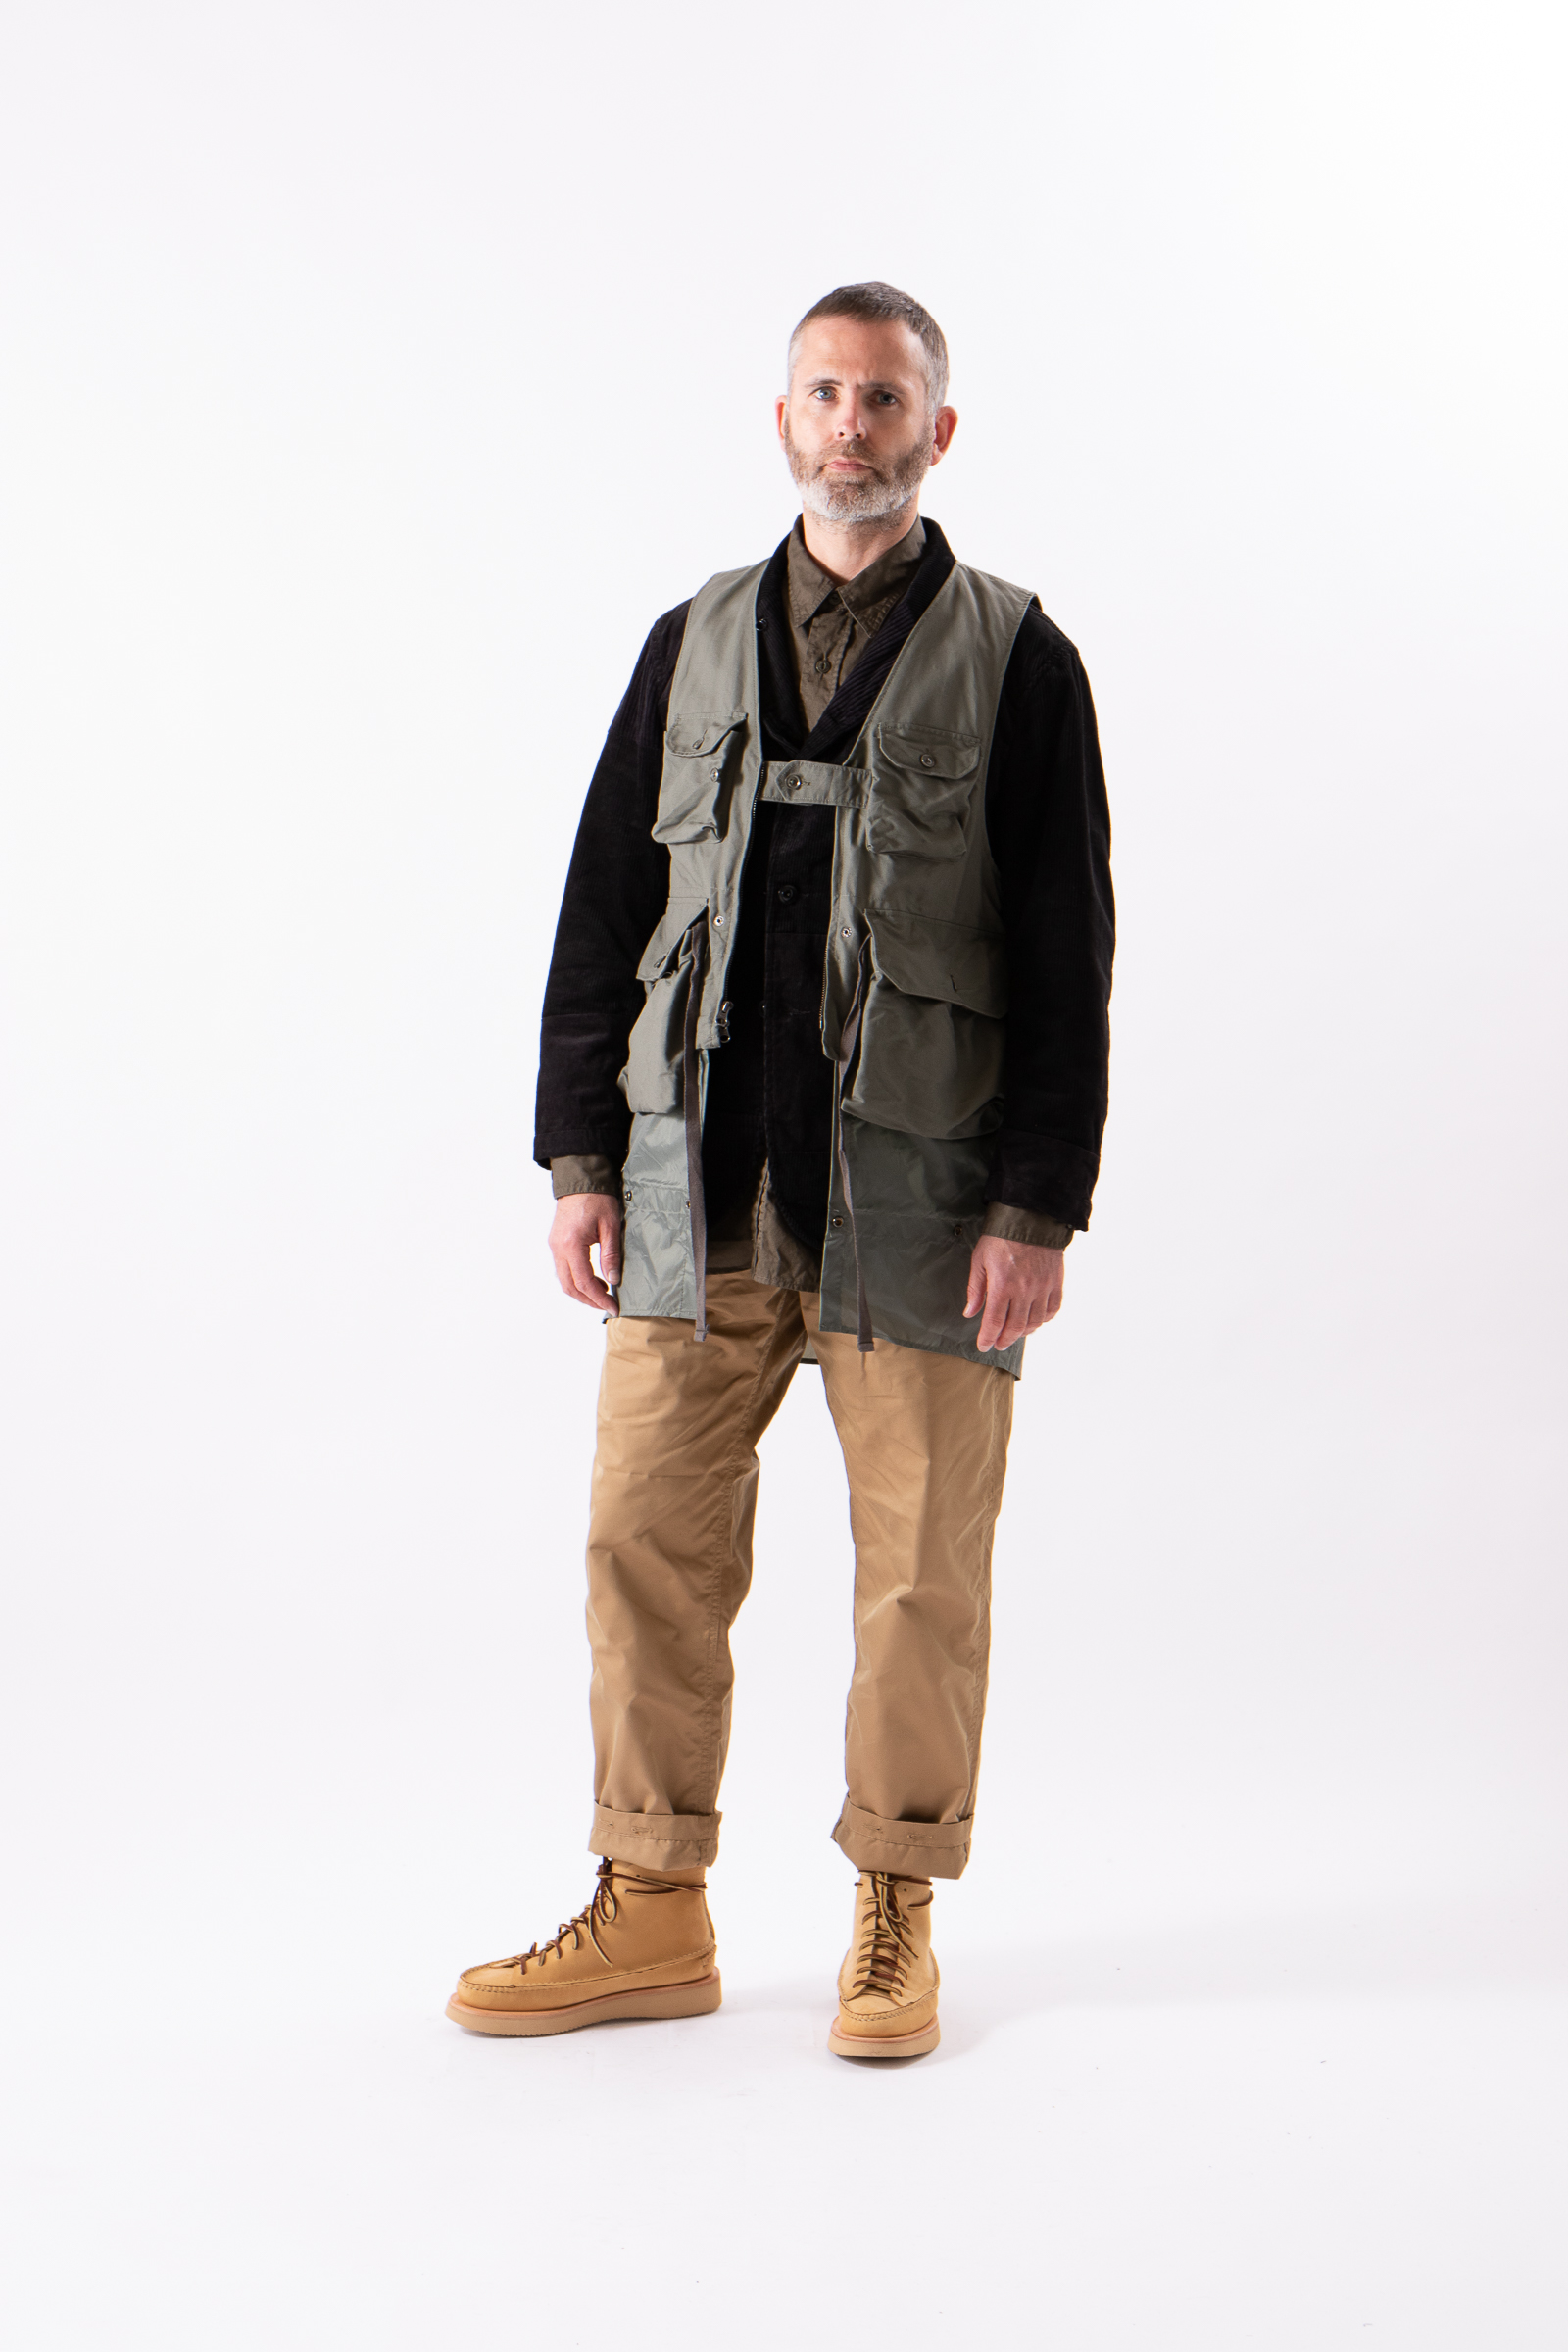 ENGINEERED GARMENTS AW19 PART 2